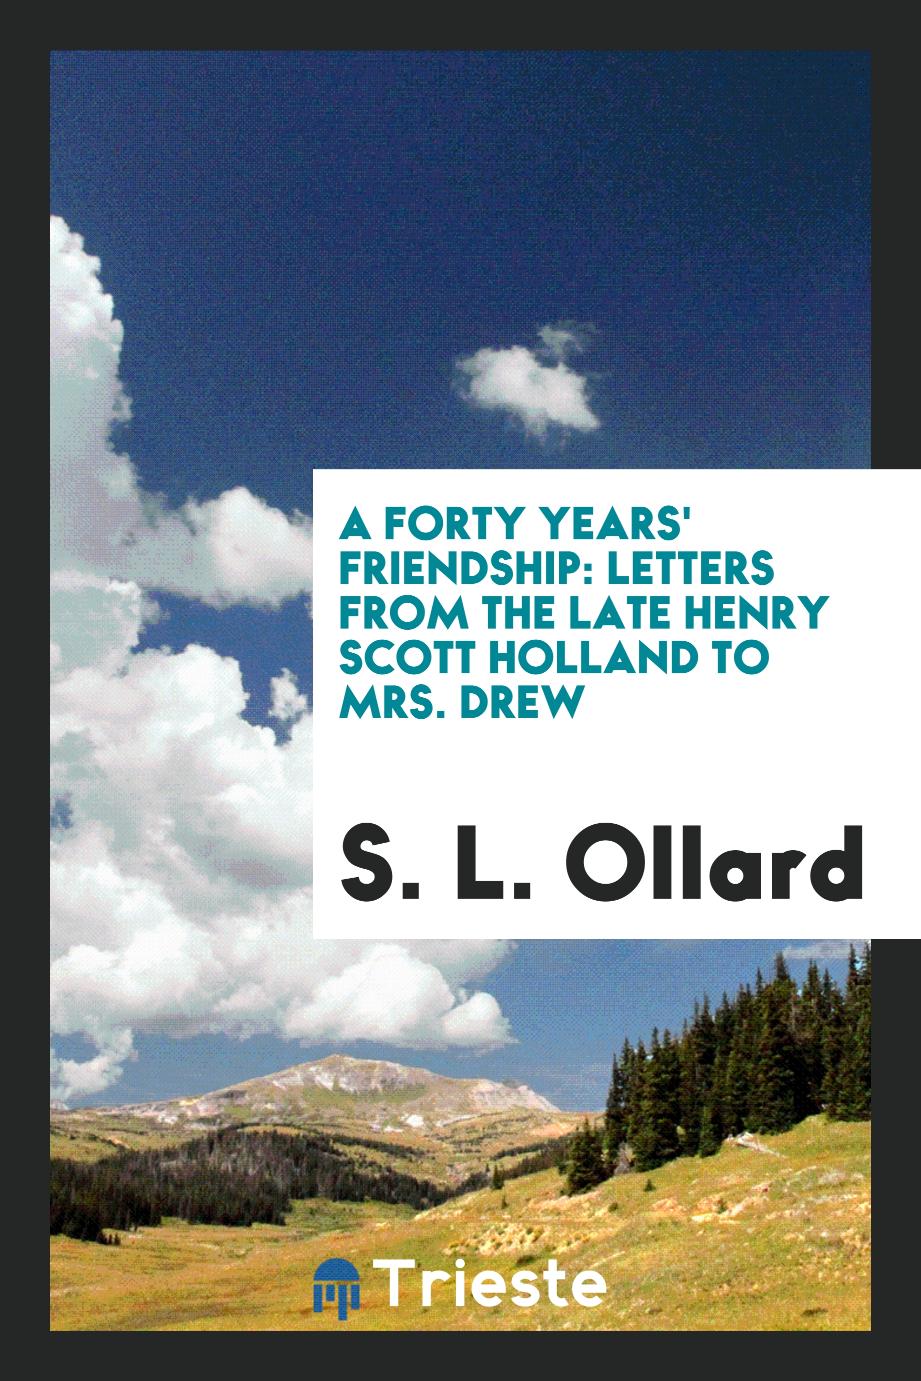 A forty years' friendship: letters from the late Henry Scott Holland to Mrs. Drew